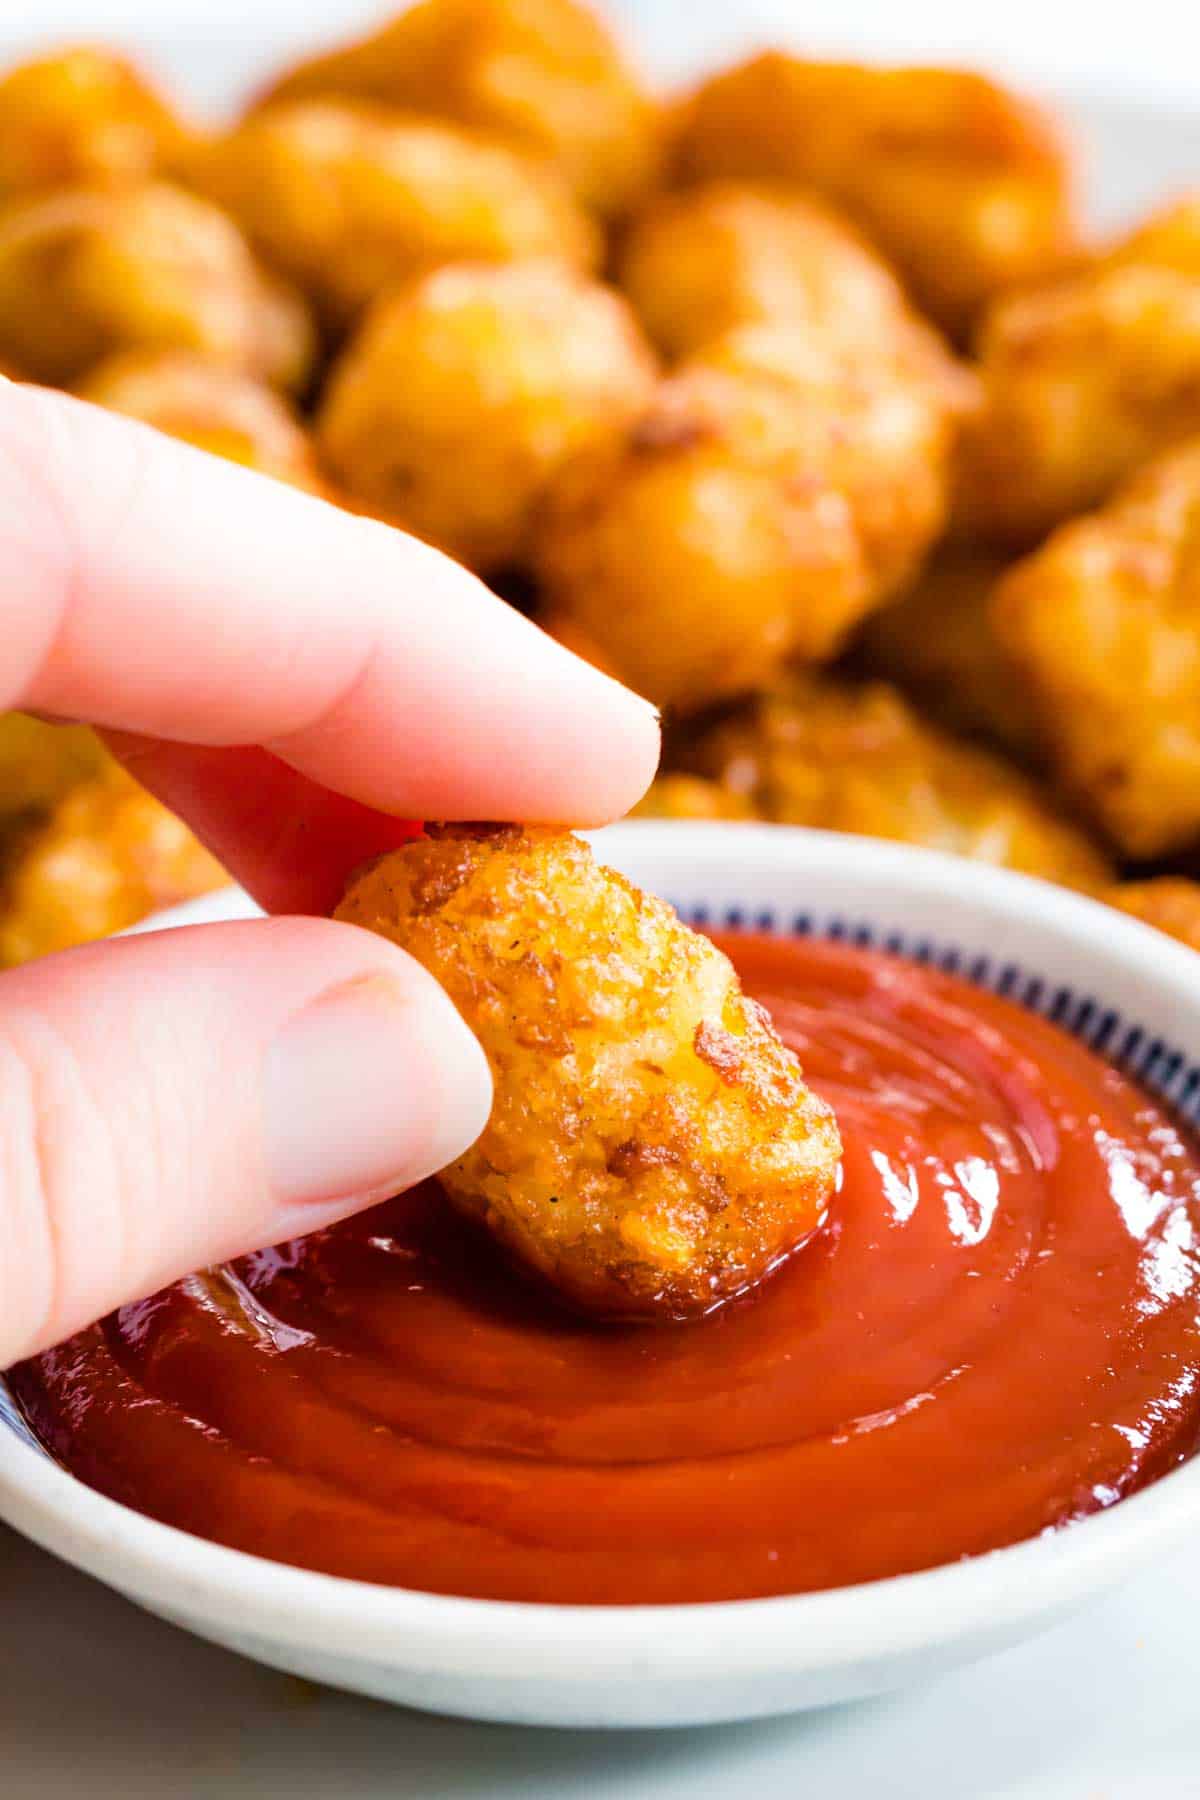 A hand dips an air fried tater tot into a bowl of ketchup.